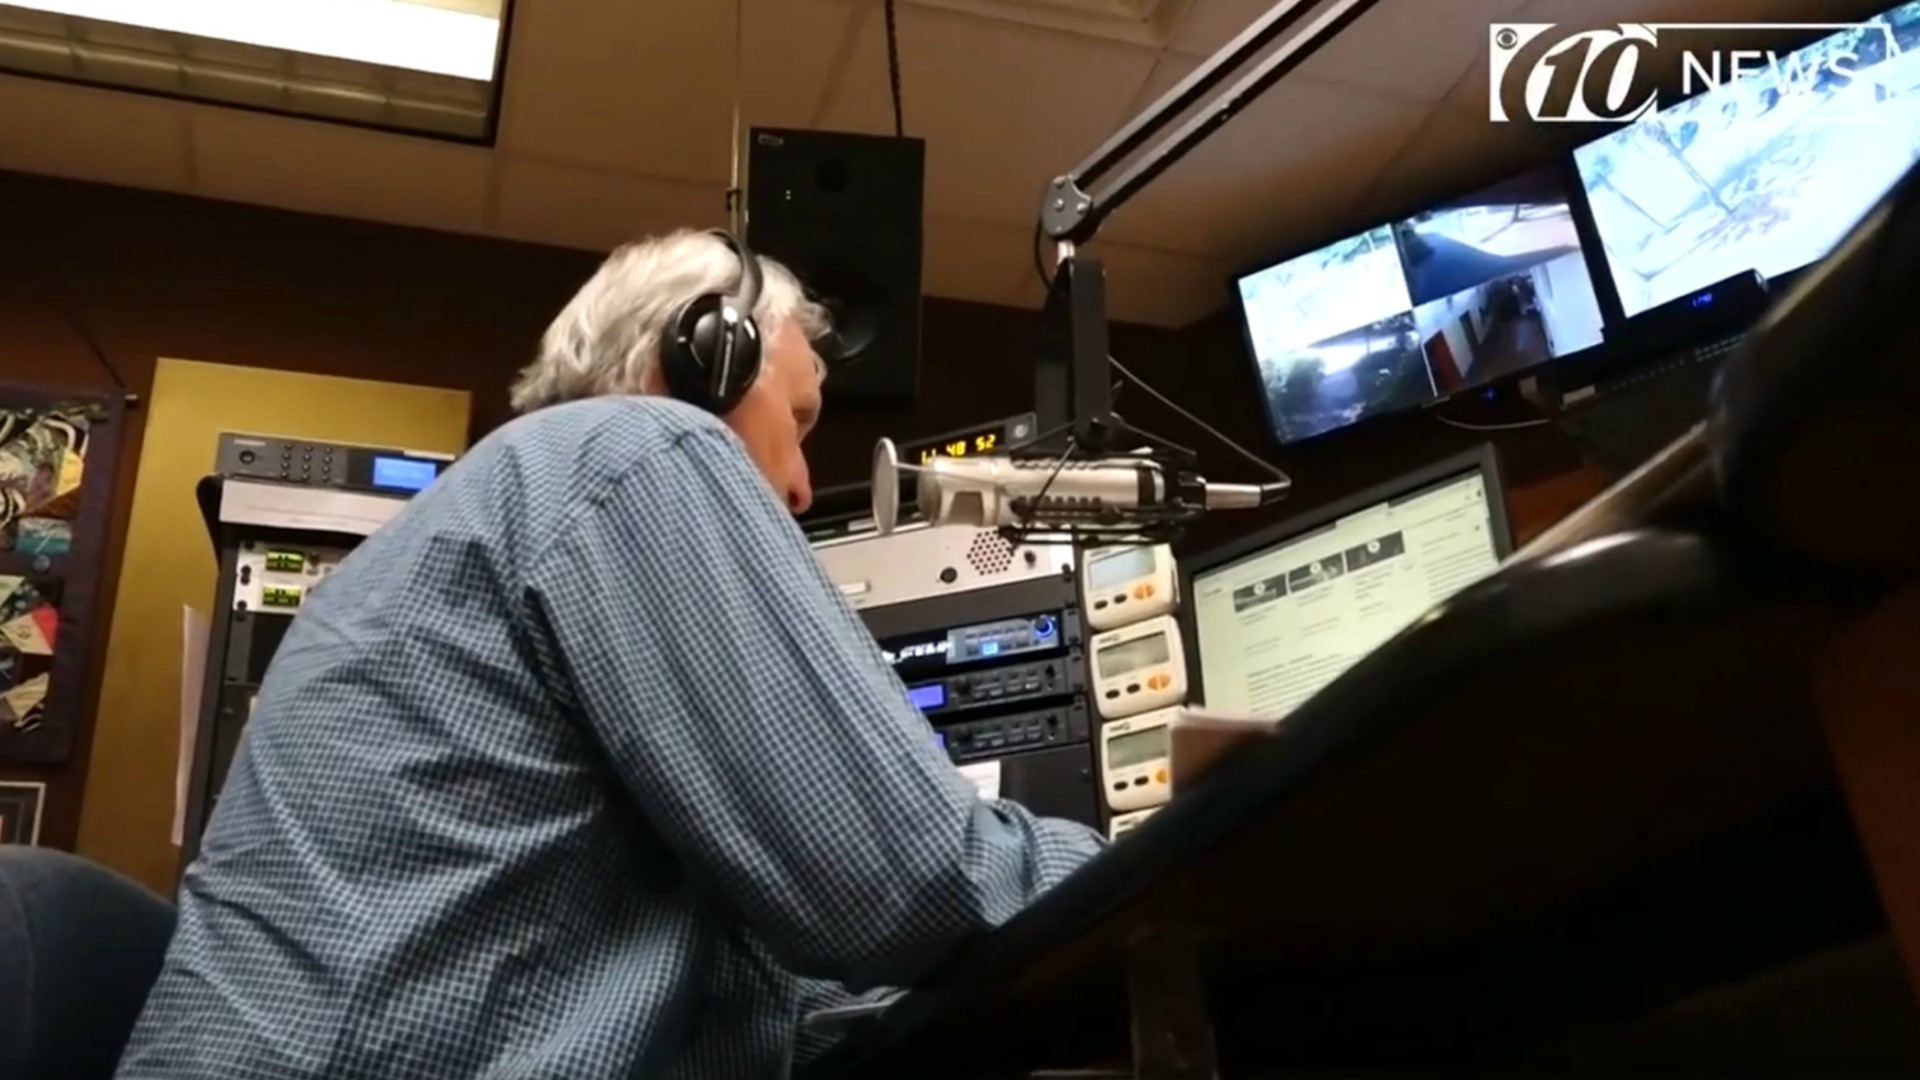 With more than 80-thousand listeners throughout Central Florida, WMNF is trying to keep its audience and hopes to bring in new listeners.